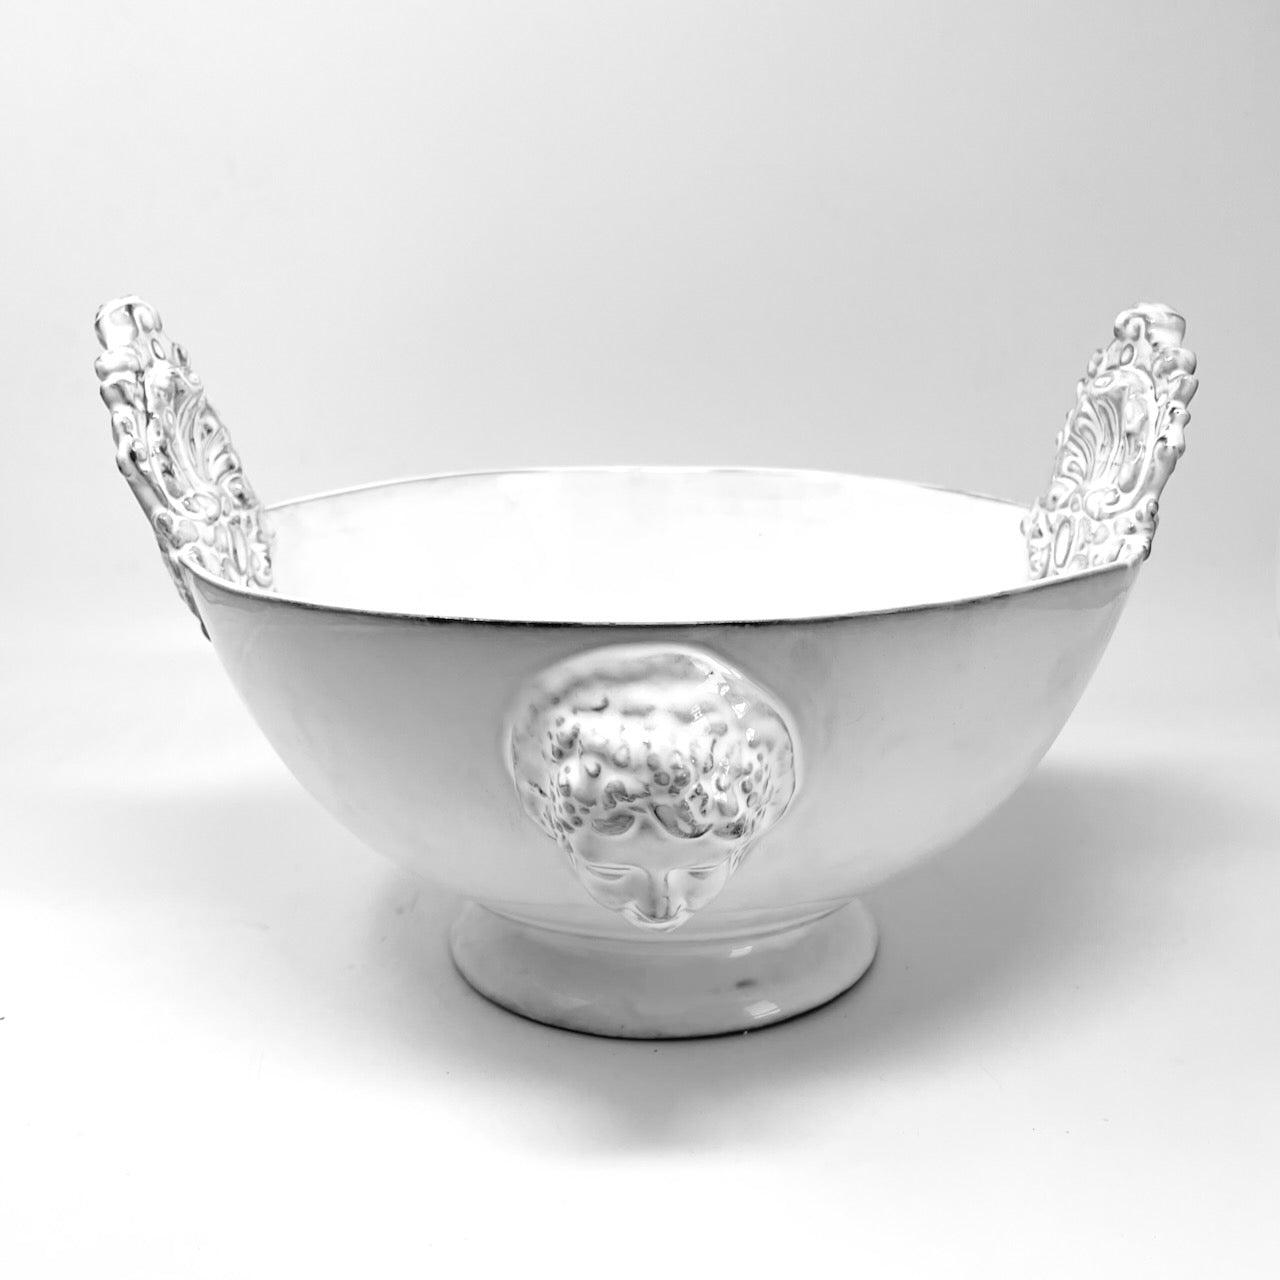 Mon Ange serving bowl with handle